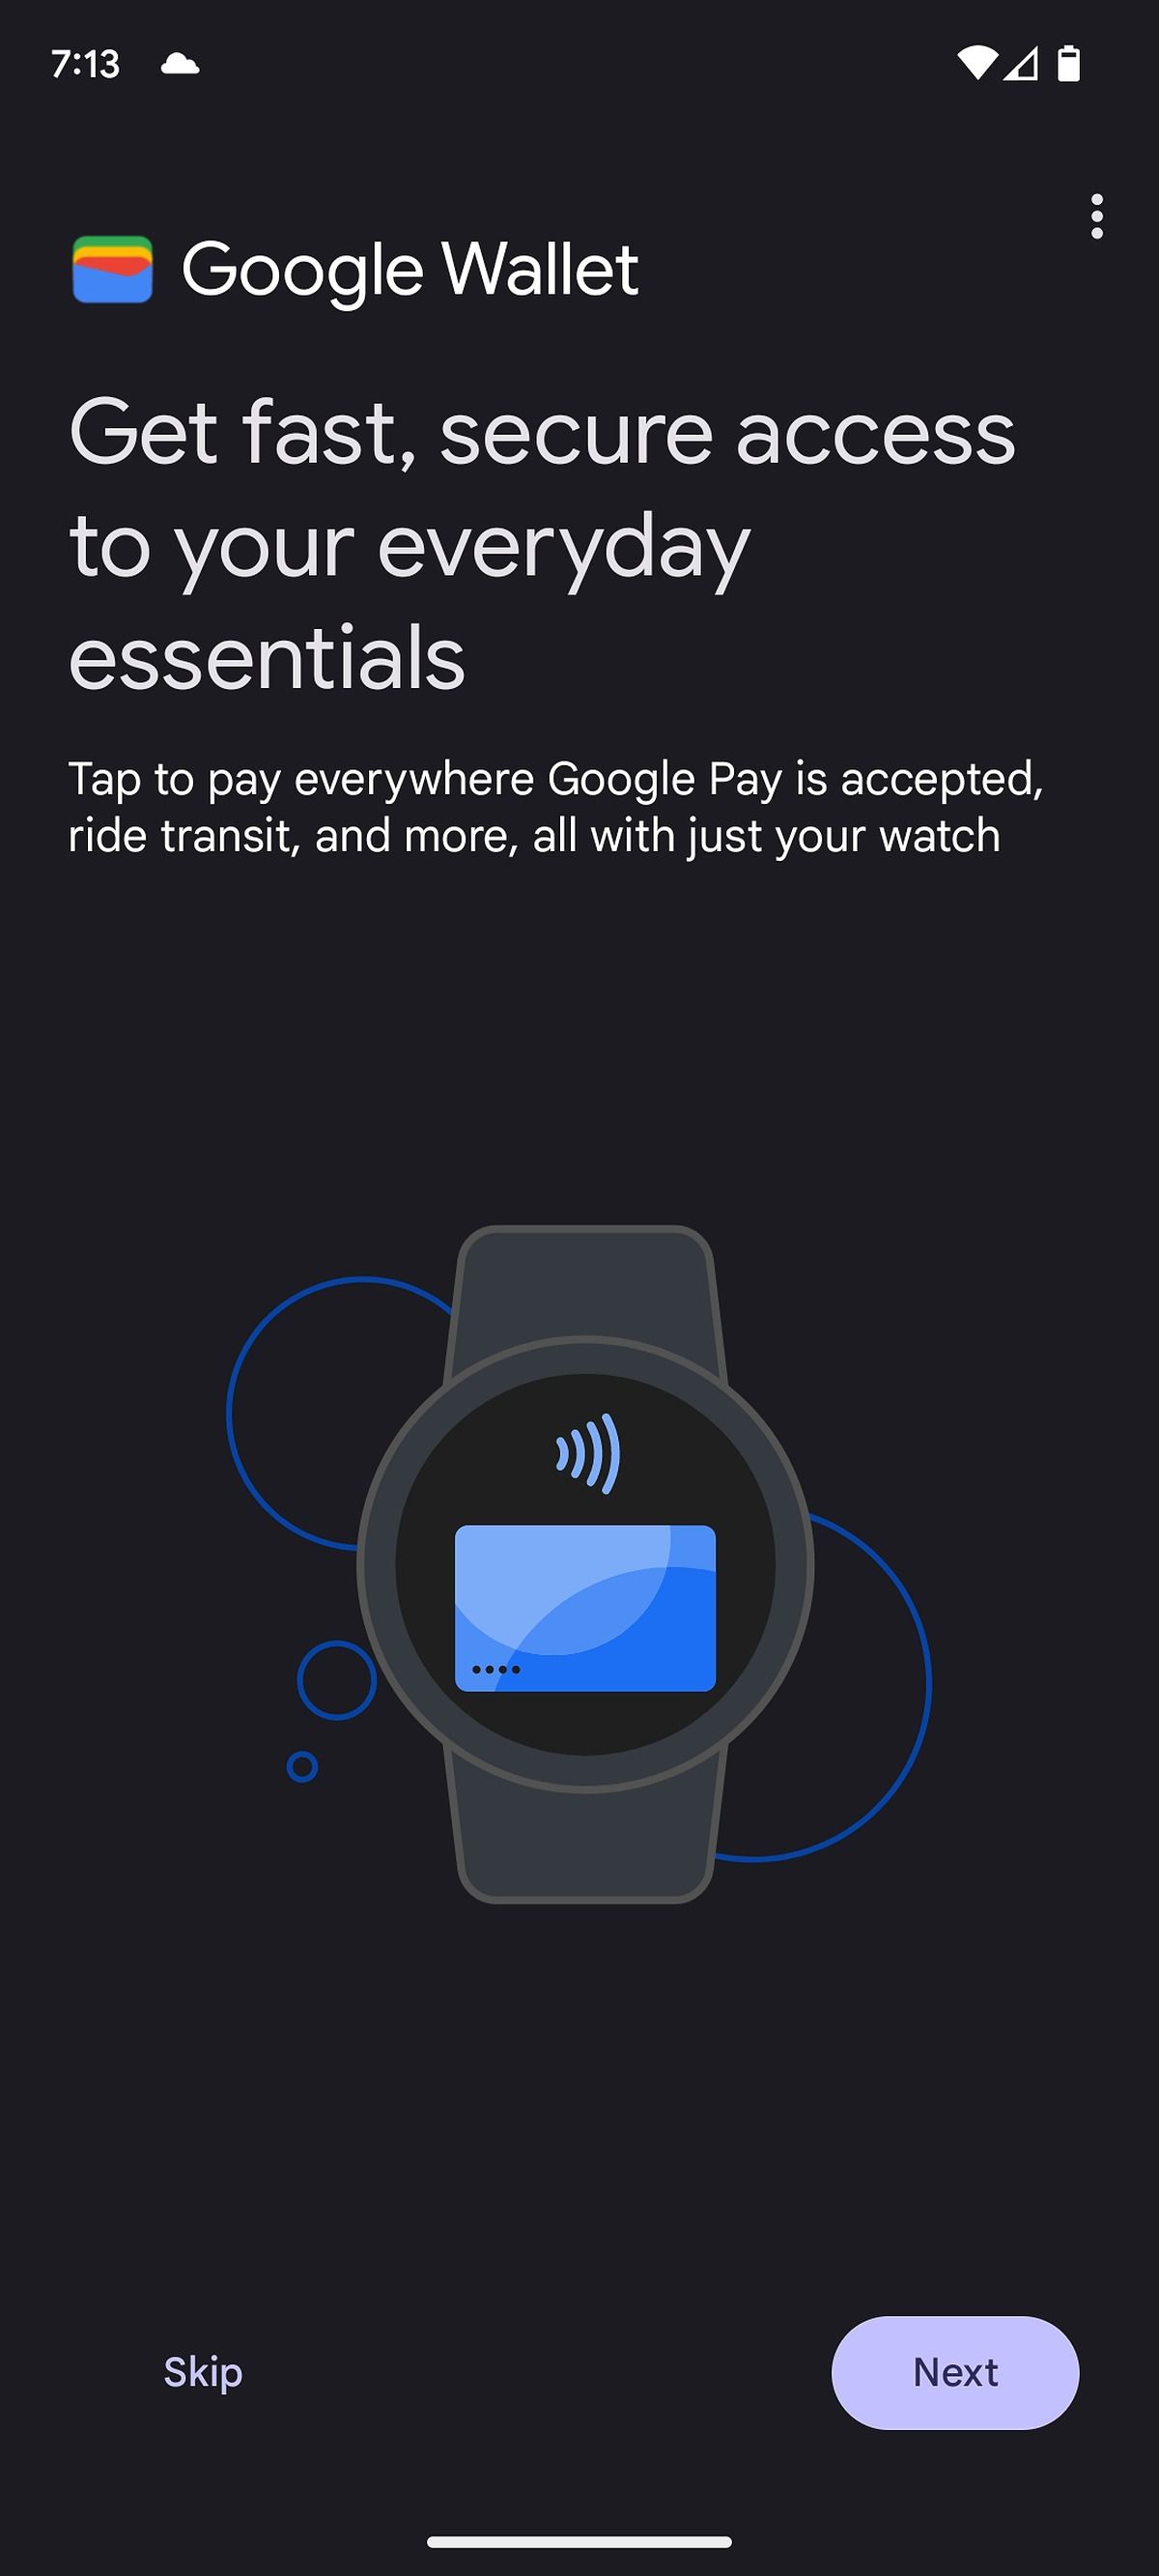 The Google Wallet splash screen during the Pixel Watch setup experience.